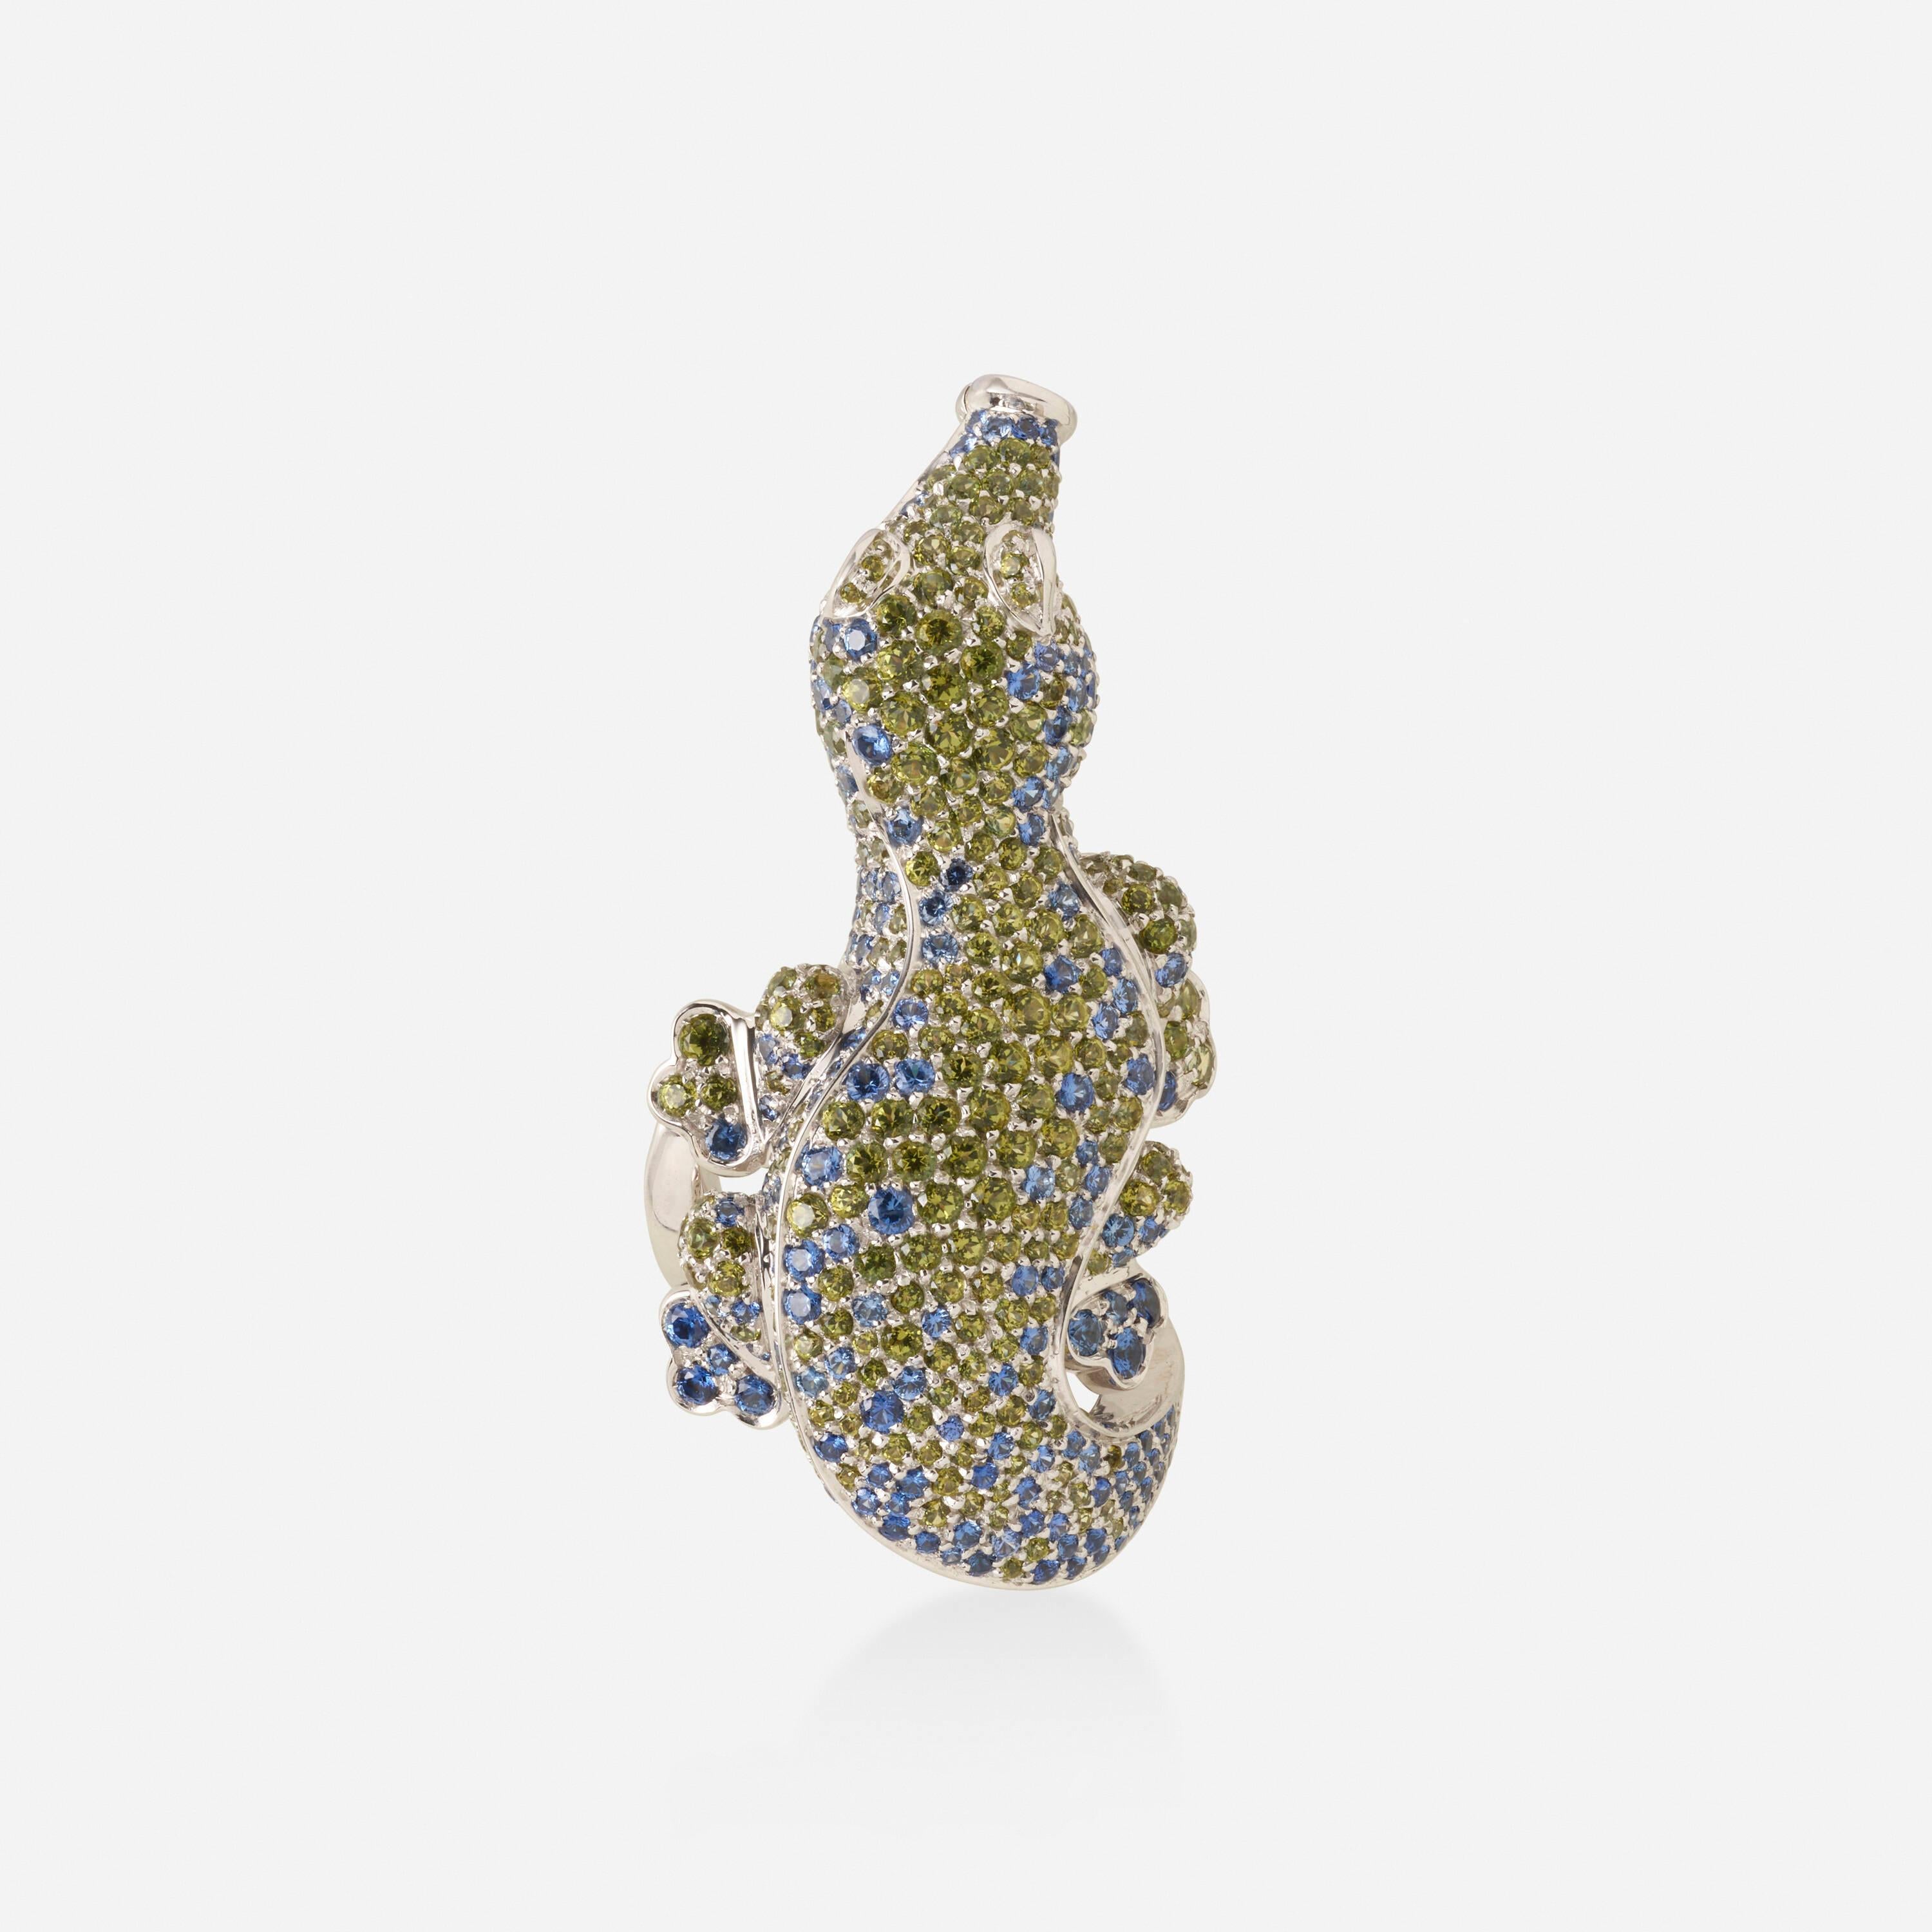 Pasquale Bruni 'Pensiero D’Africa' Sapphire Garnet and Topaz Crocodile Ring In Excellent Condition For Sale In New York, NY